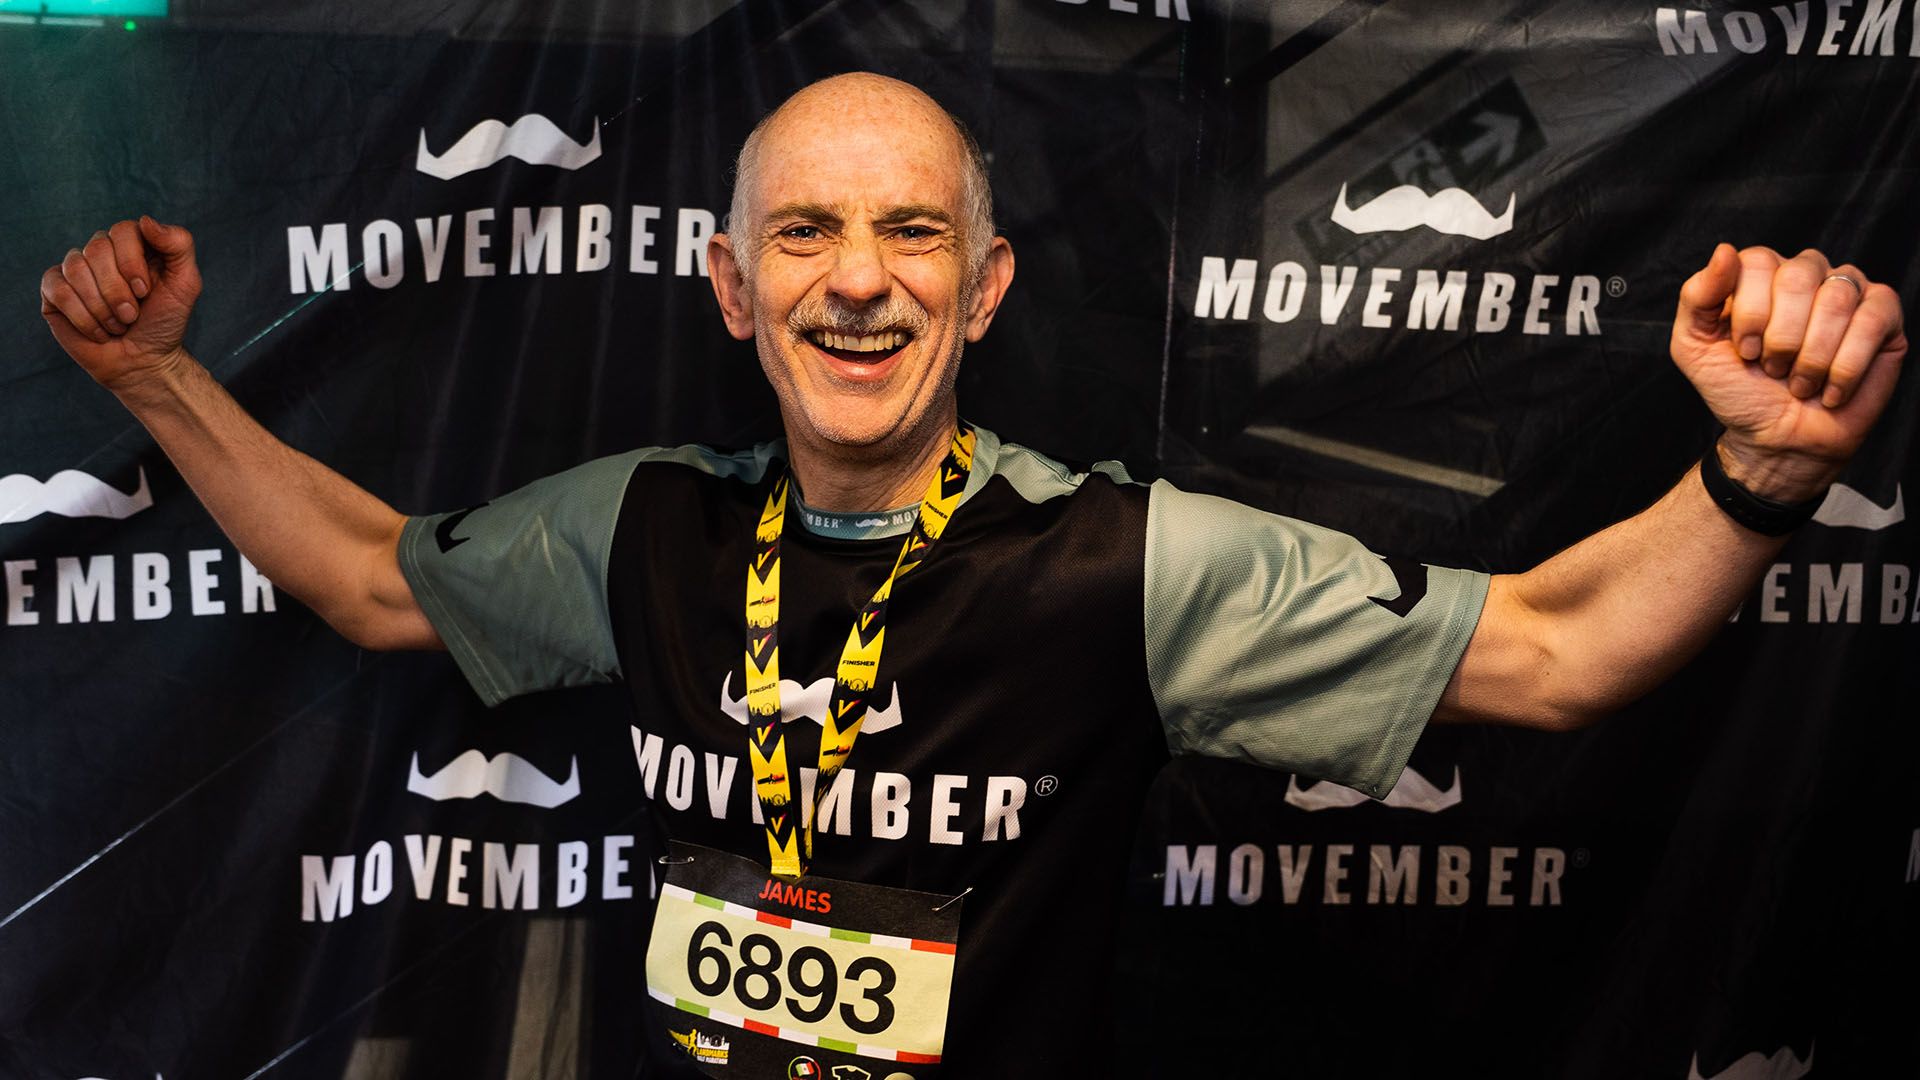 Photo of runner in Movember-branded running gear, triumphantly lifting his arms to camera after finishing a race.